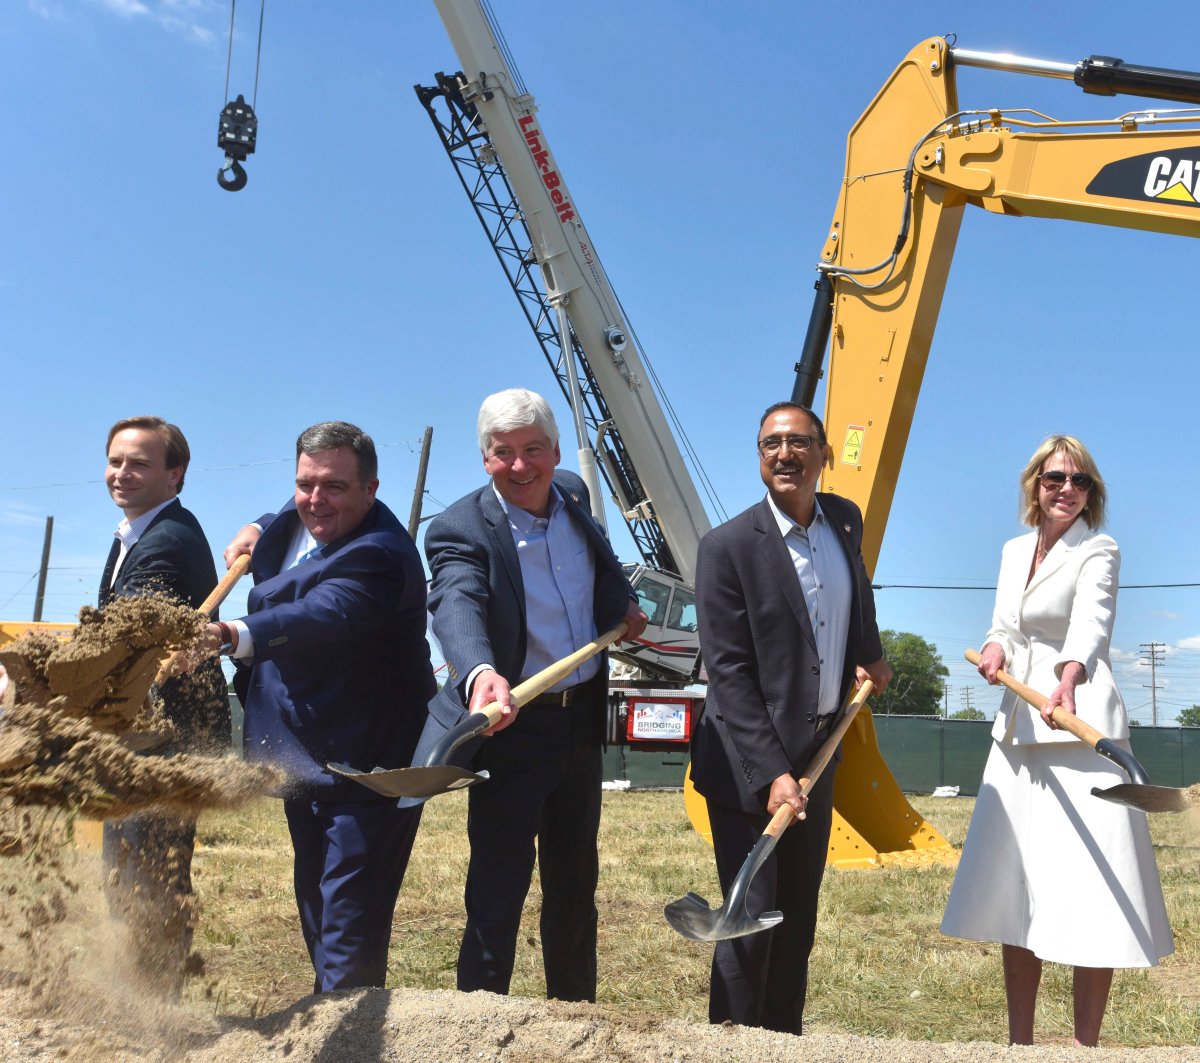 From left, Michigan Lt. Gov. Brian Calley, Dwight Duncan, chair of the Windsor-Detroit Bridge Authority, Michigan Gov. Rick Snyder, the Amarjeet Sohi, Canadian Minister of Infrastructure and Communities and Kelly Craft, U.S. Ambassador to Canada, shovel dirt during a ceremonial groundbreaking event for the Gordie Howe International Bridge in Detroit, Tuesday, July 17, 2018. 